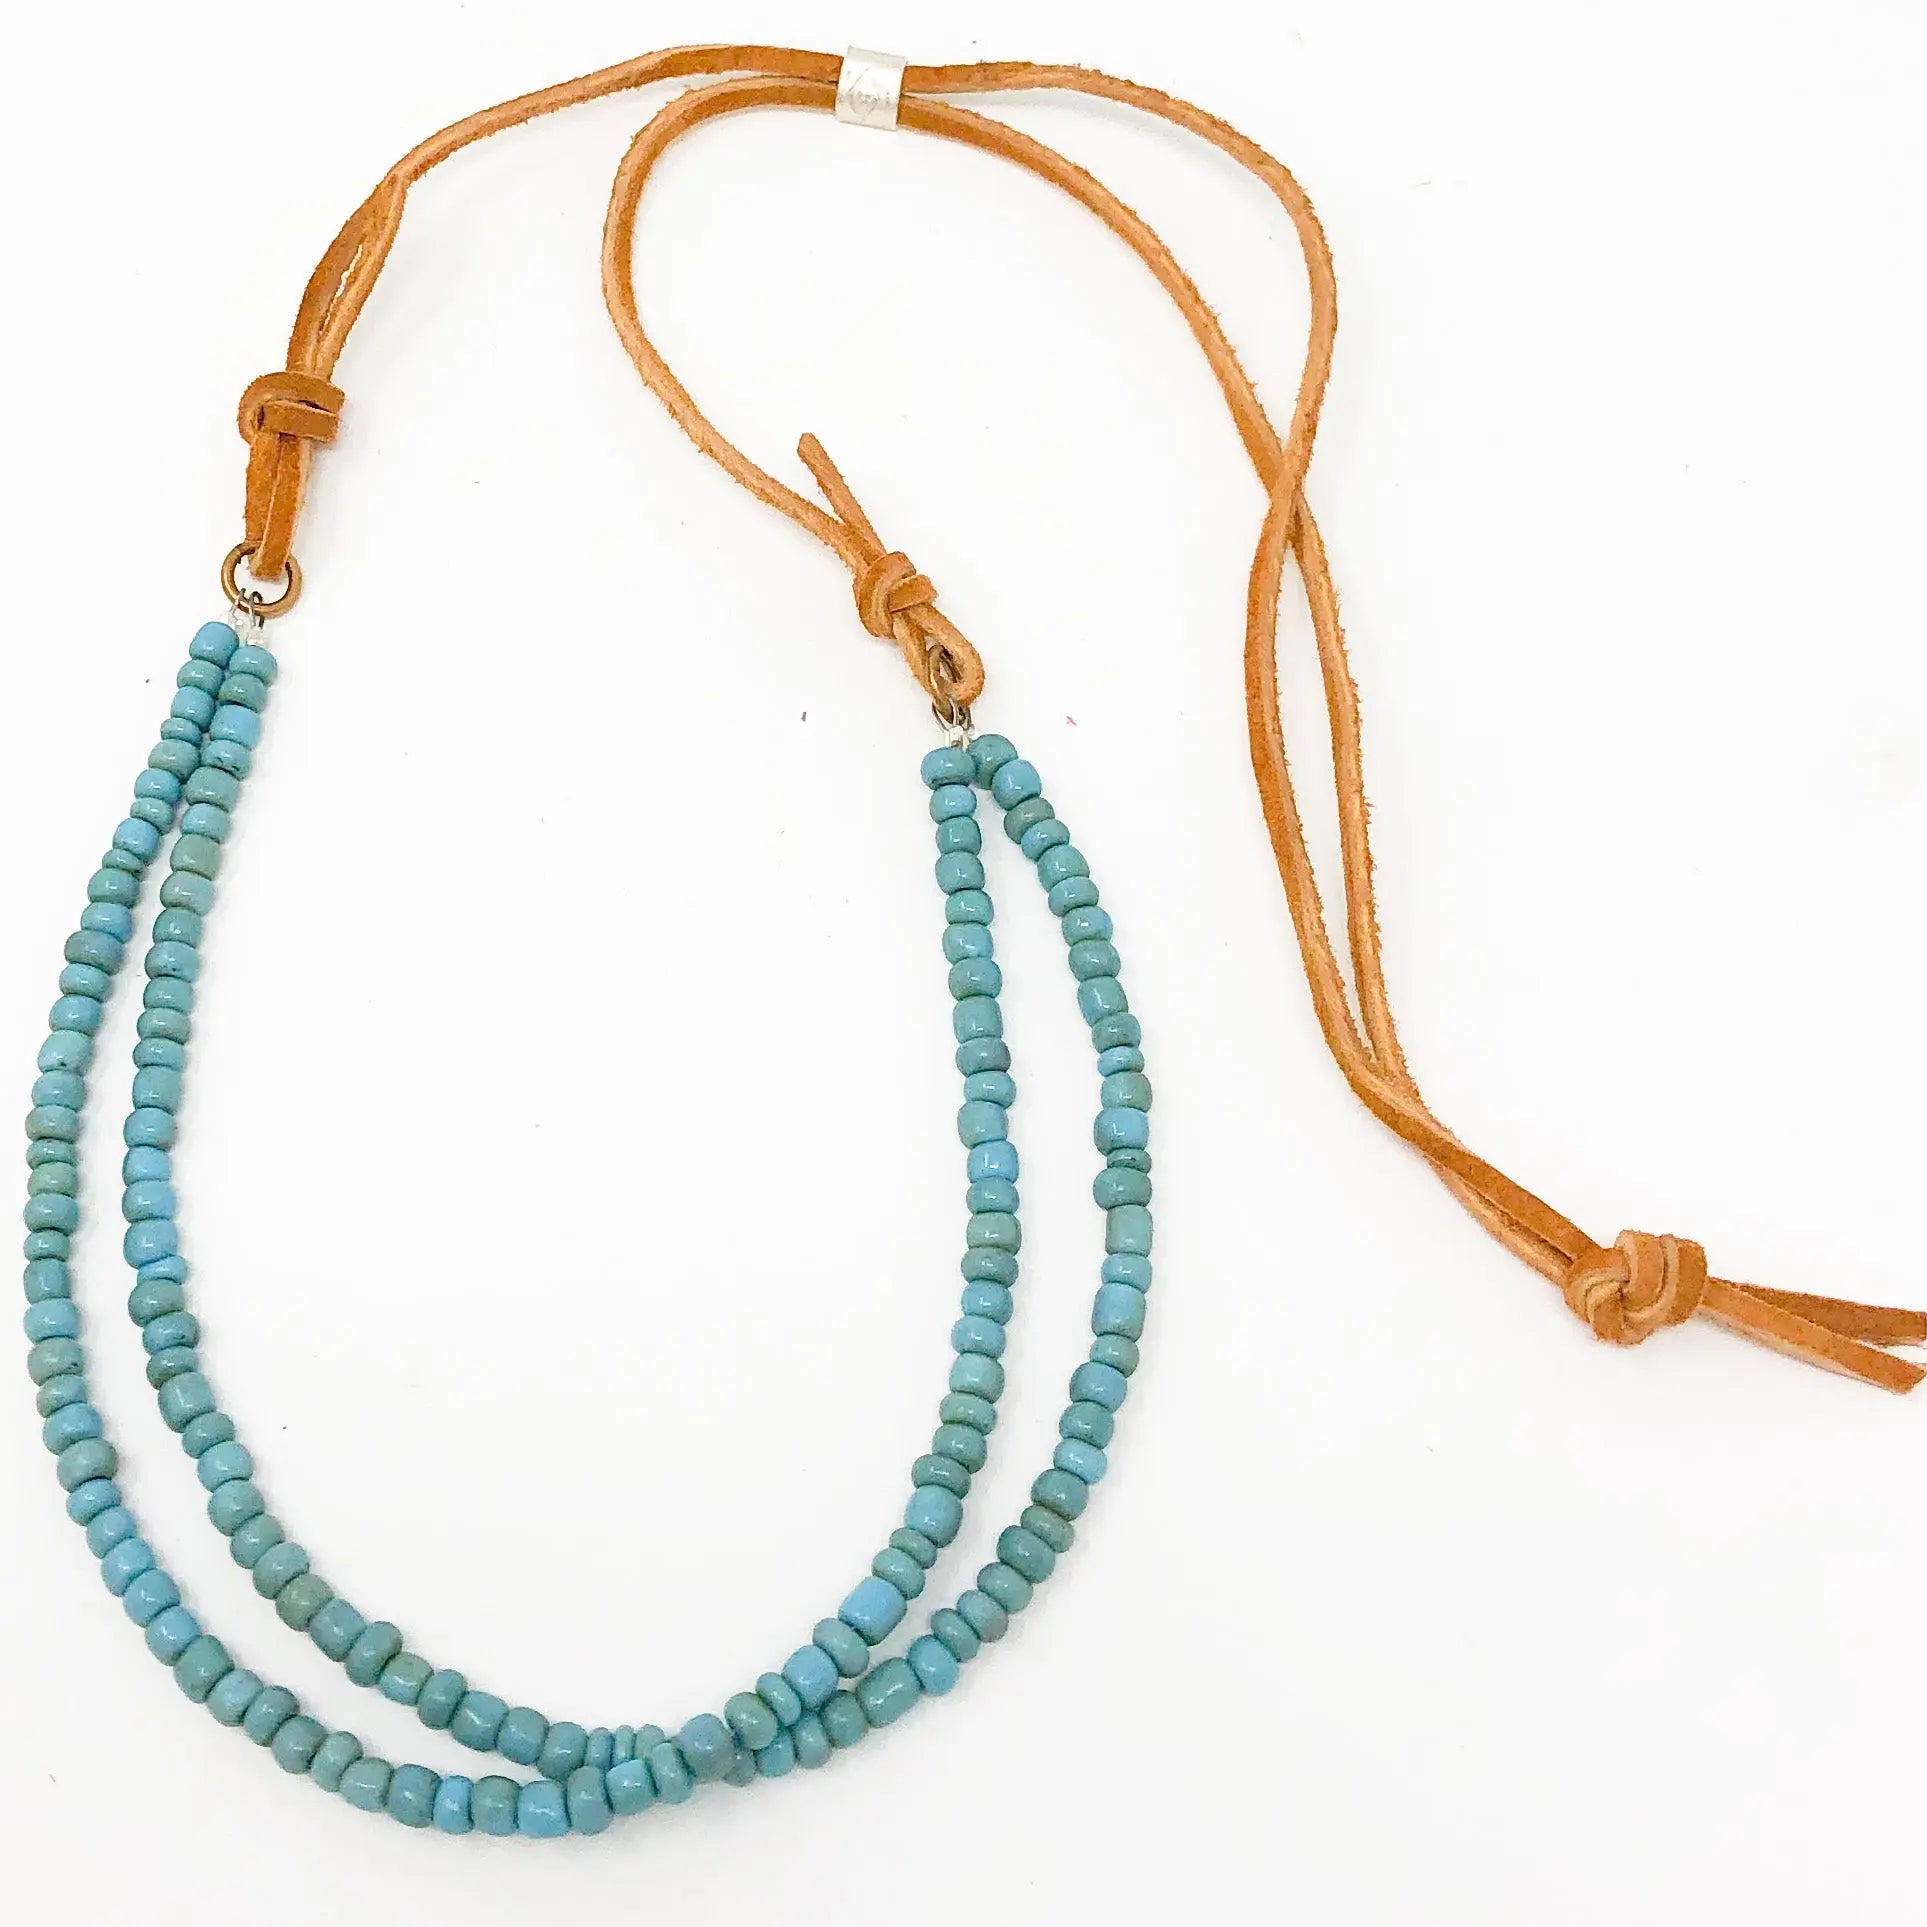 Anya - Stacking Beaded Necklace - Turquoise Wind + The Wanderer, LLC